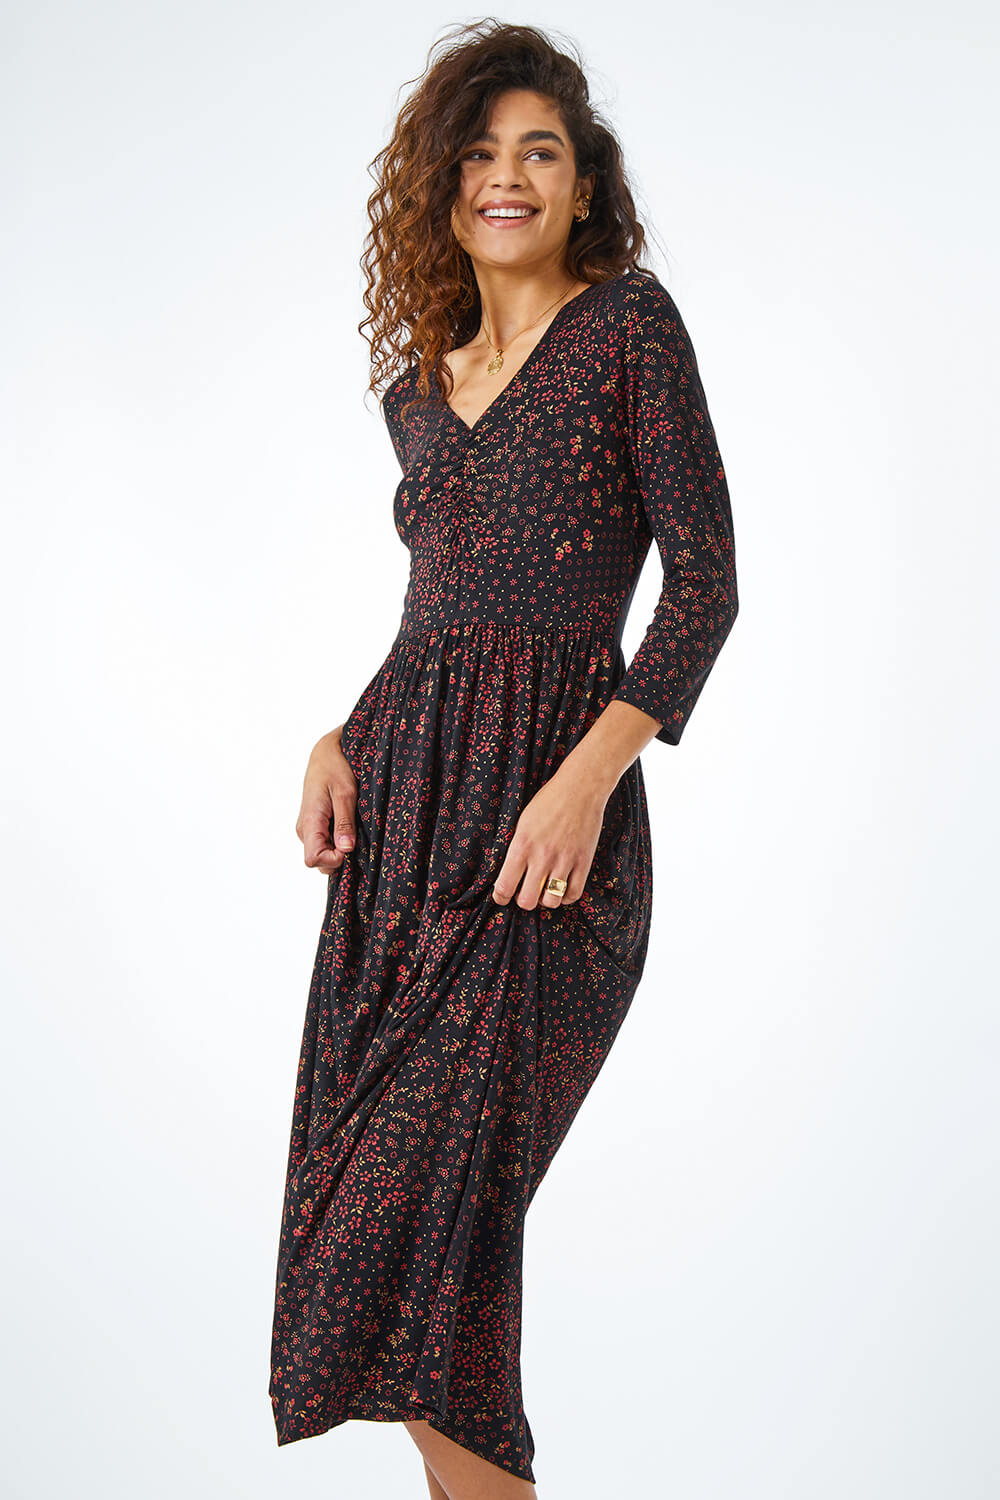 Black Ditsy Floral Maxi Dress, Image 4 of 5